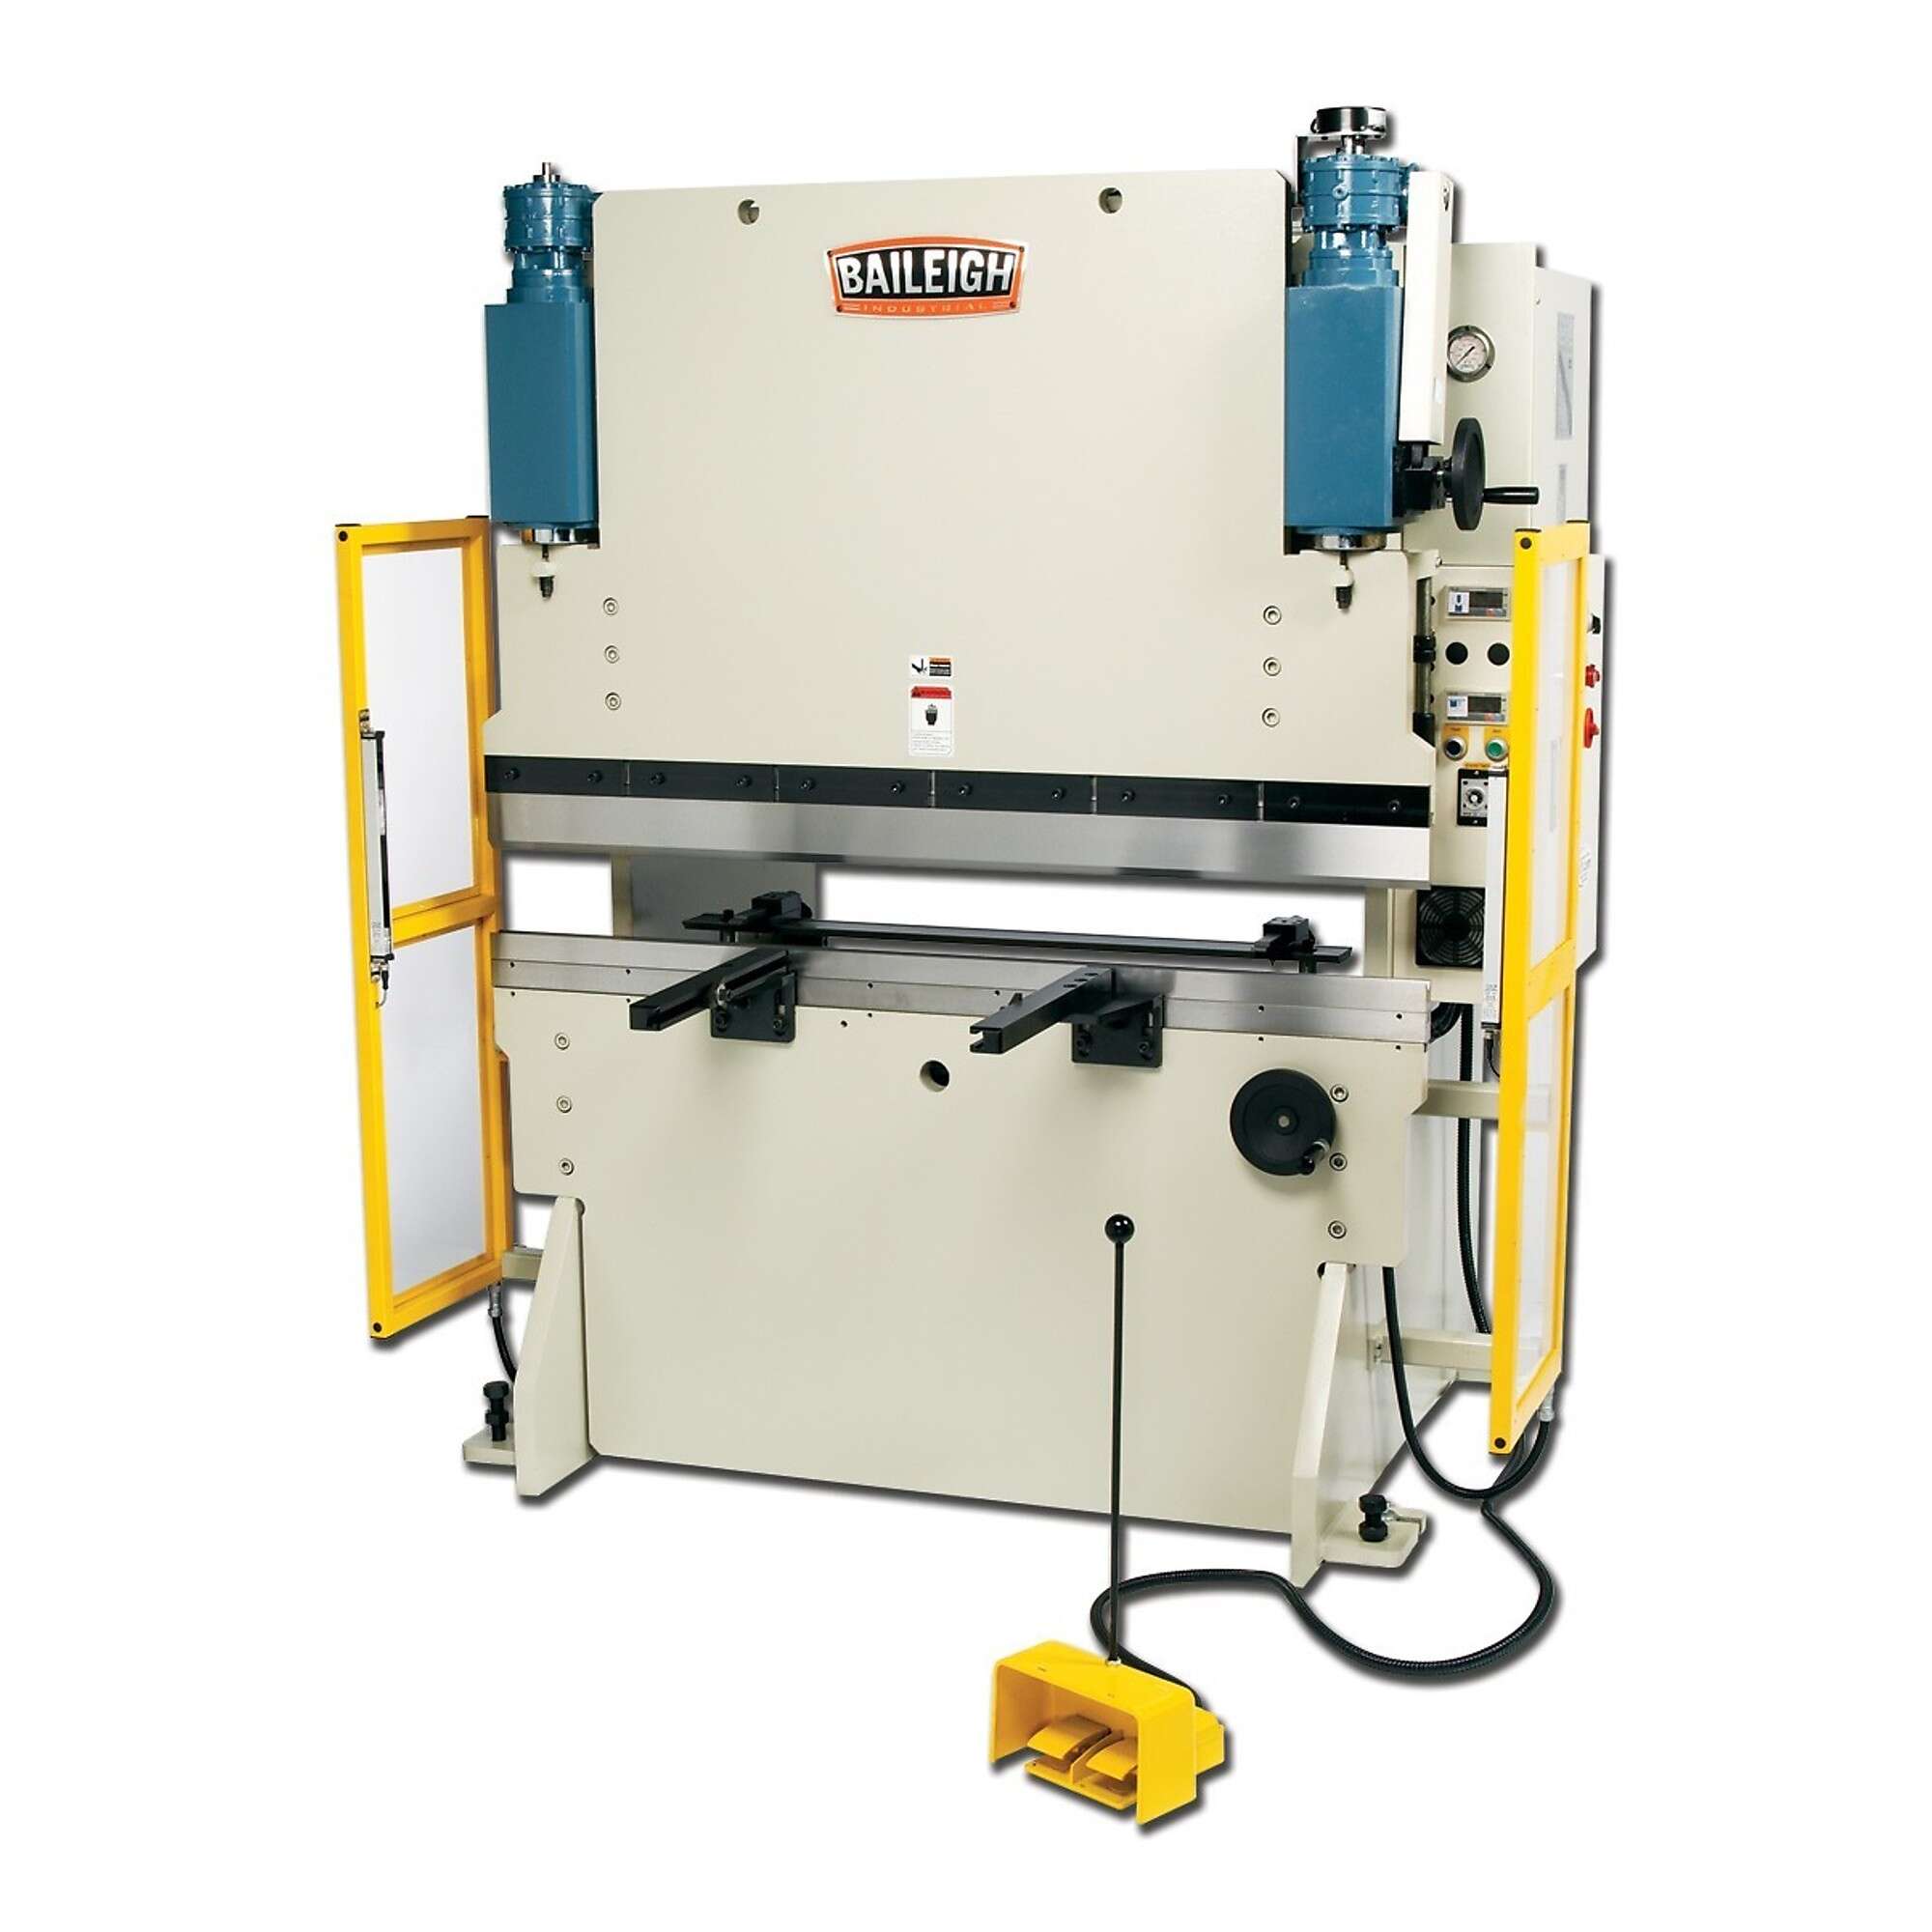 Baileigh 220V 3Phase 50 Ton Hydraulic Press Brake Distance Max Material Gauge 10 Max Depth 787 in Max Lift Height 59 in